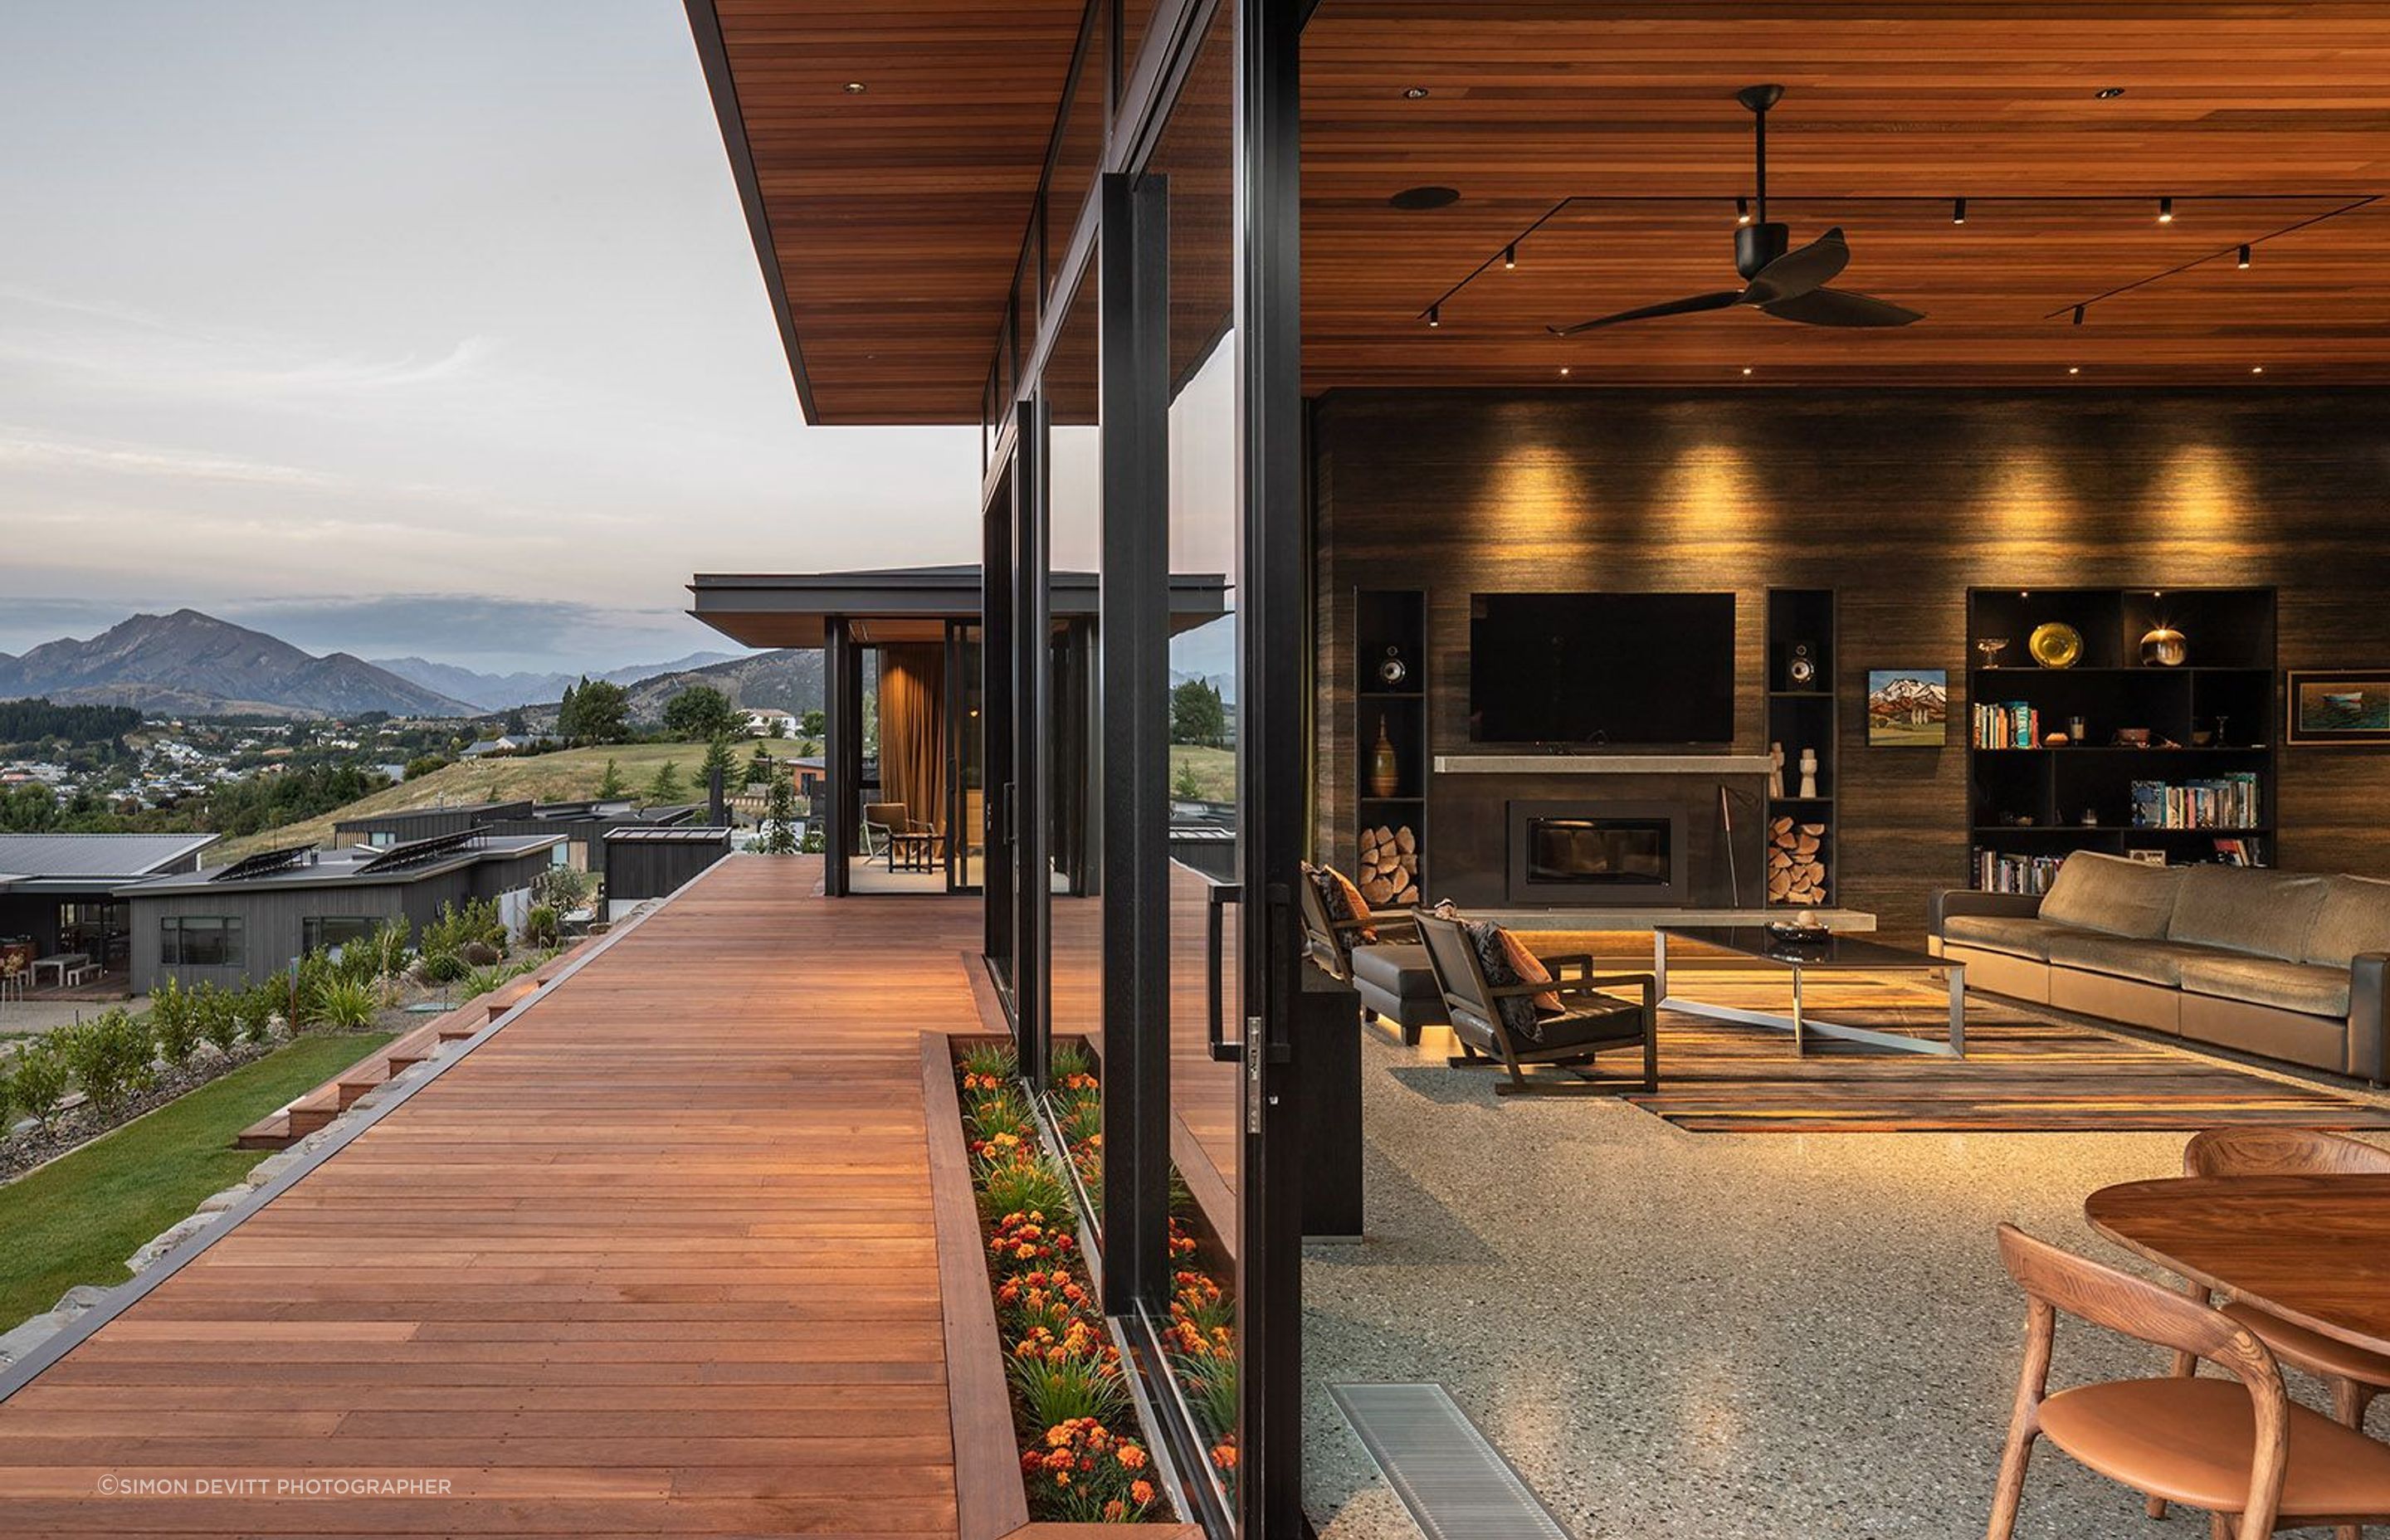 The transition from indoors to outdoors is seamless, and the materiality of cedar creates continuation.